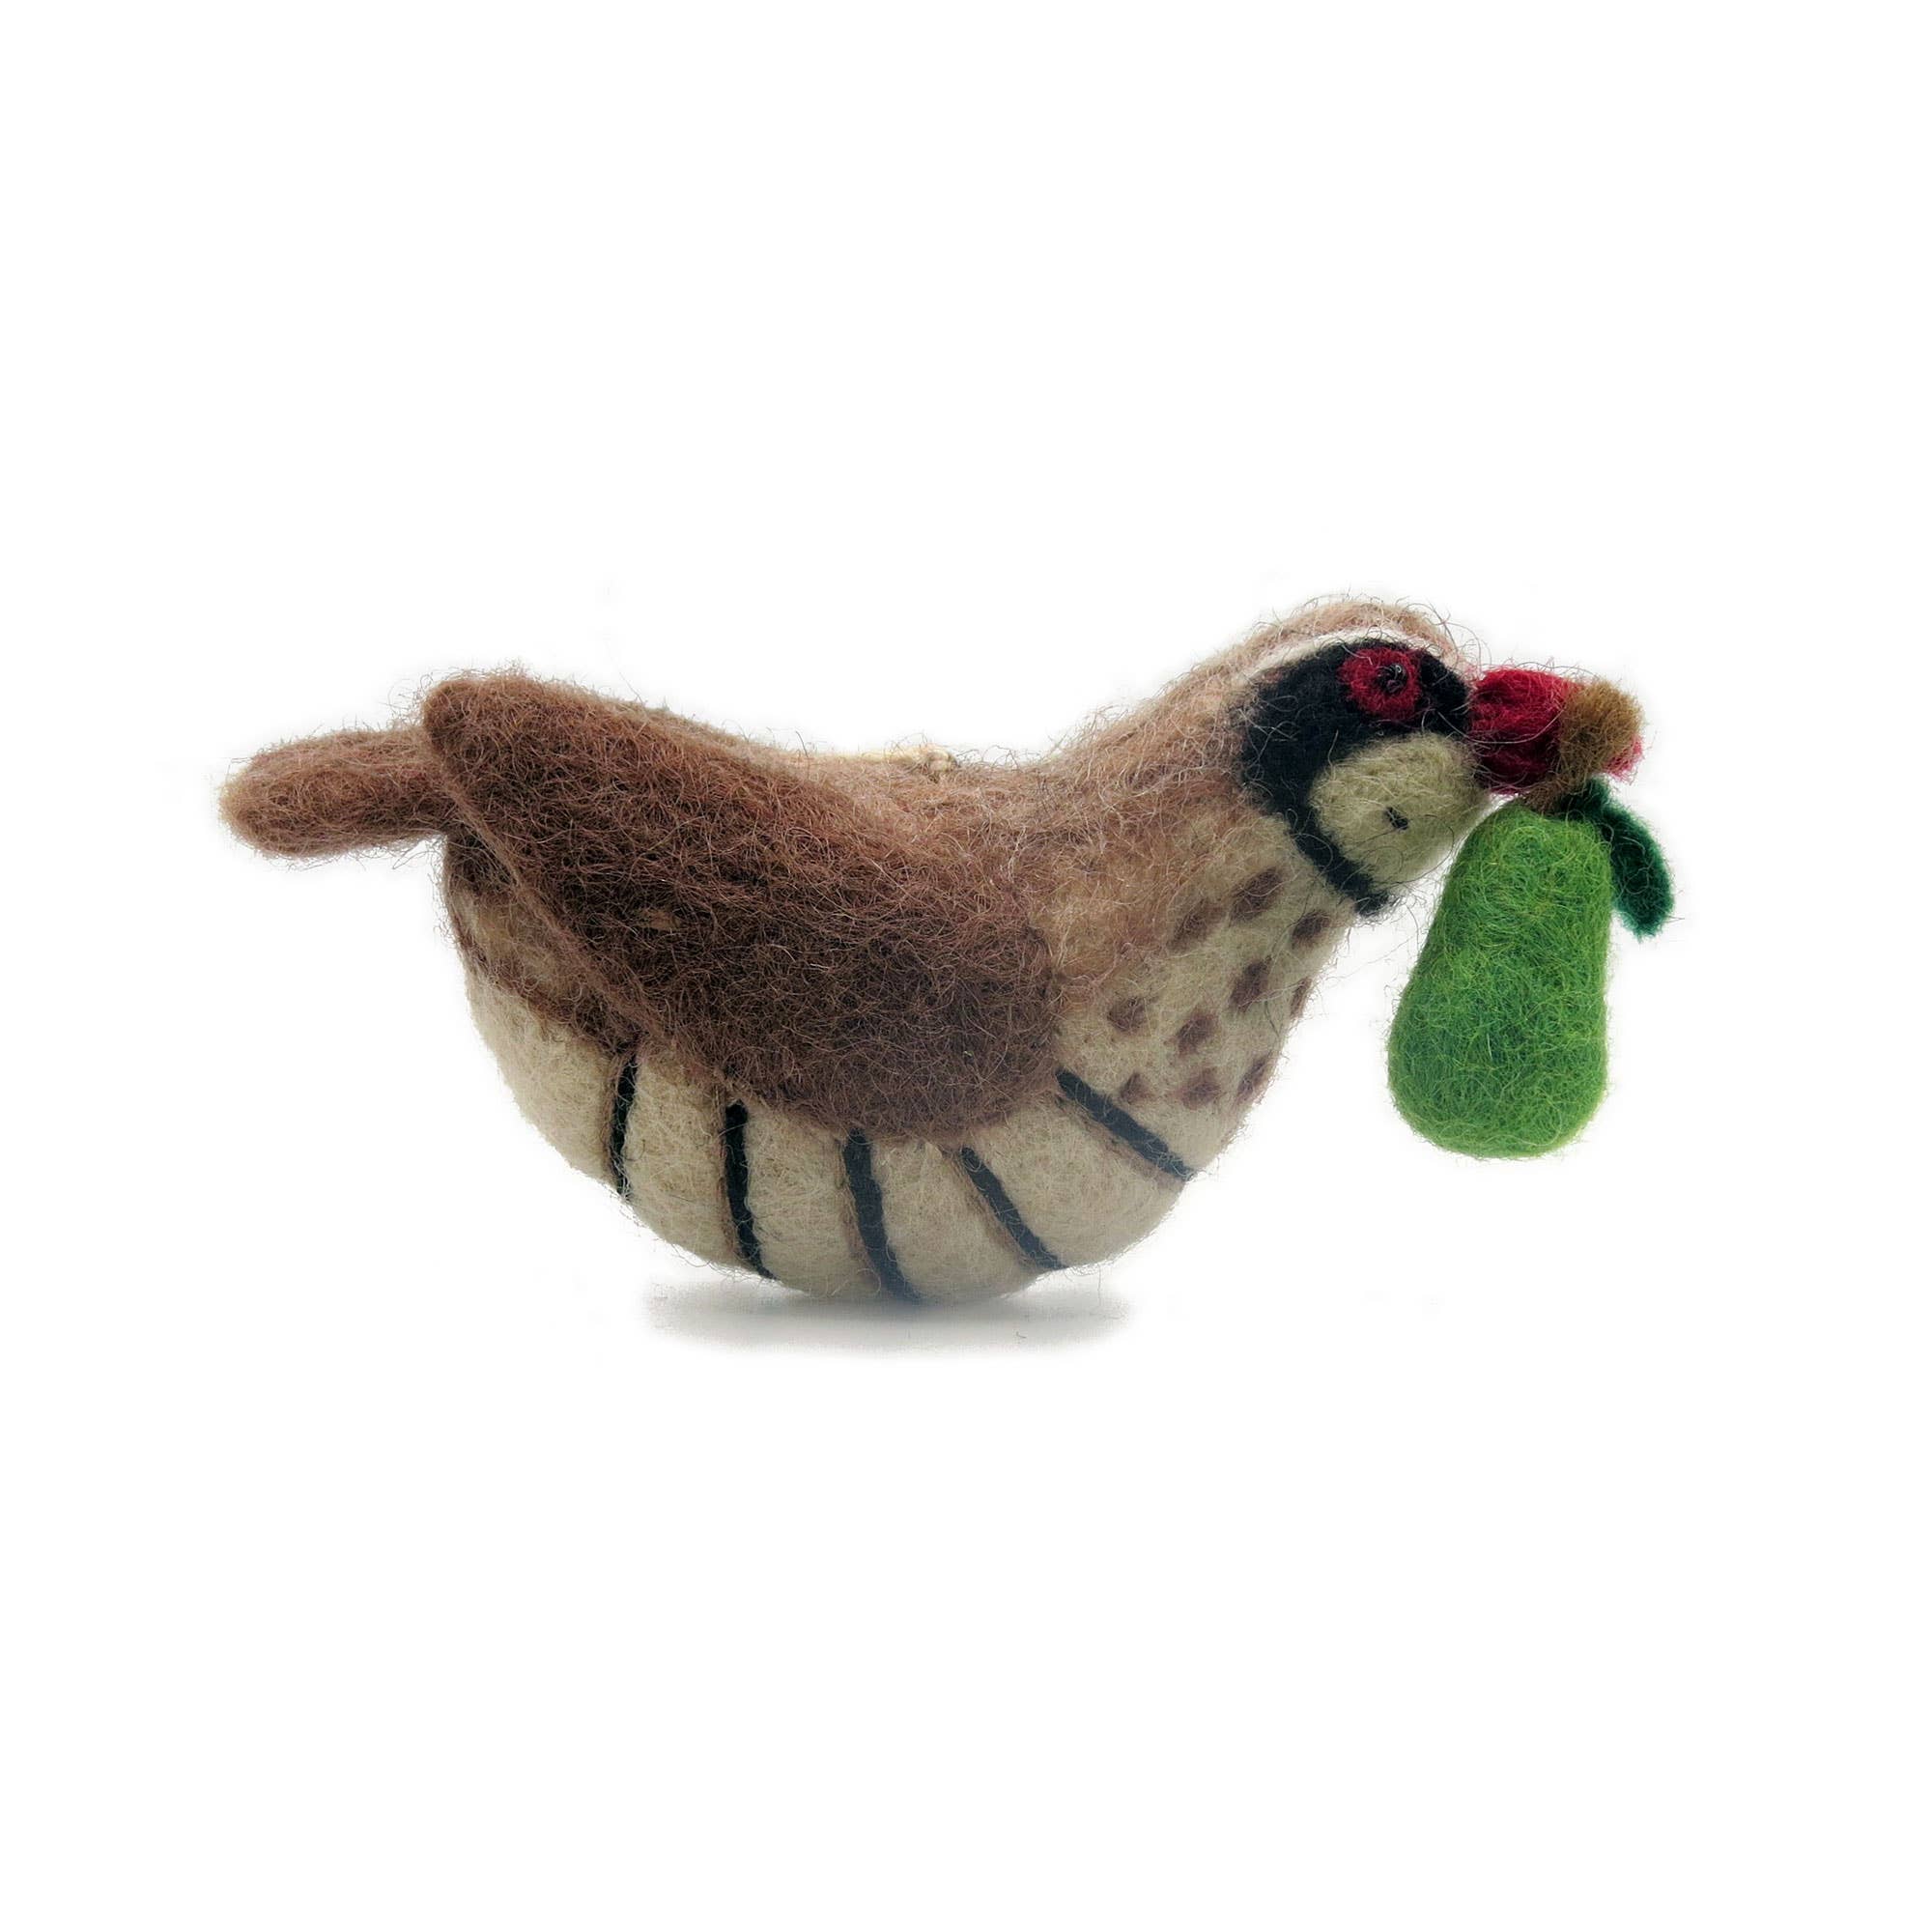 12 Days of Christmas - Partridge with a Pear